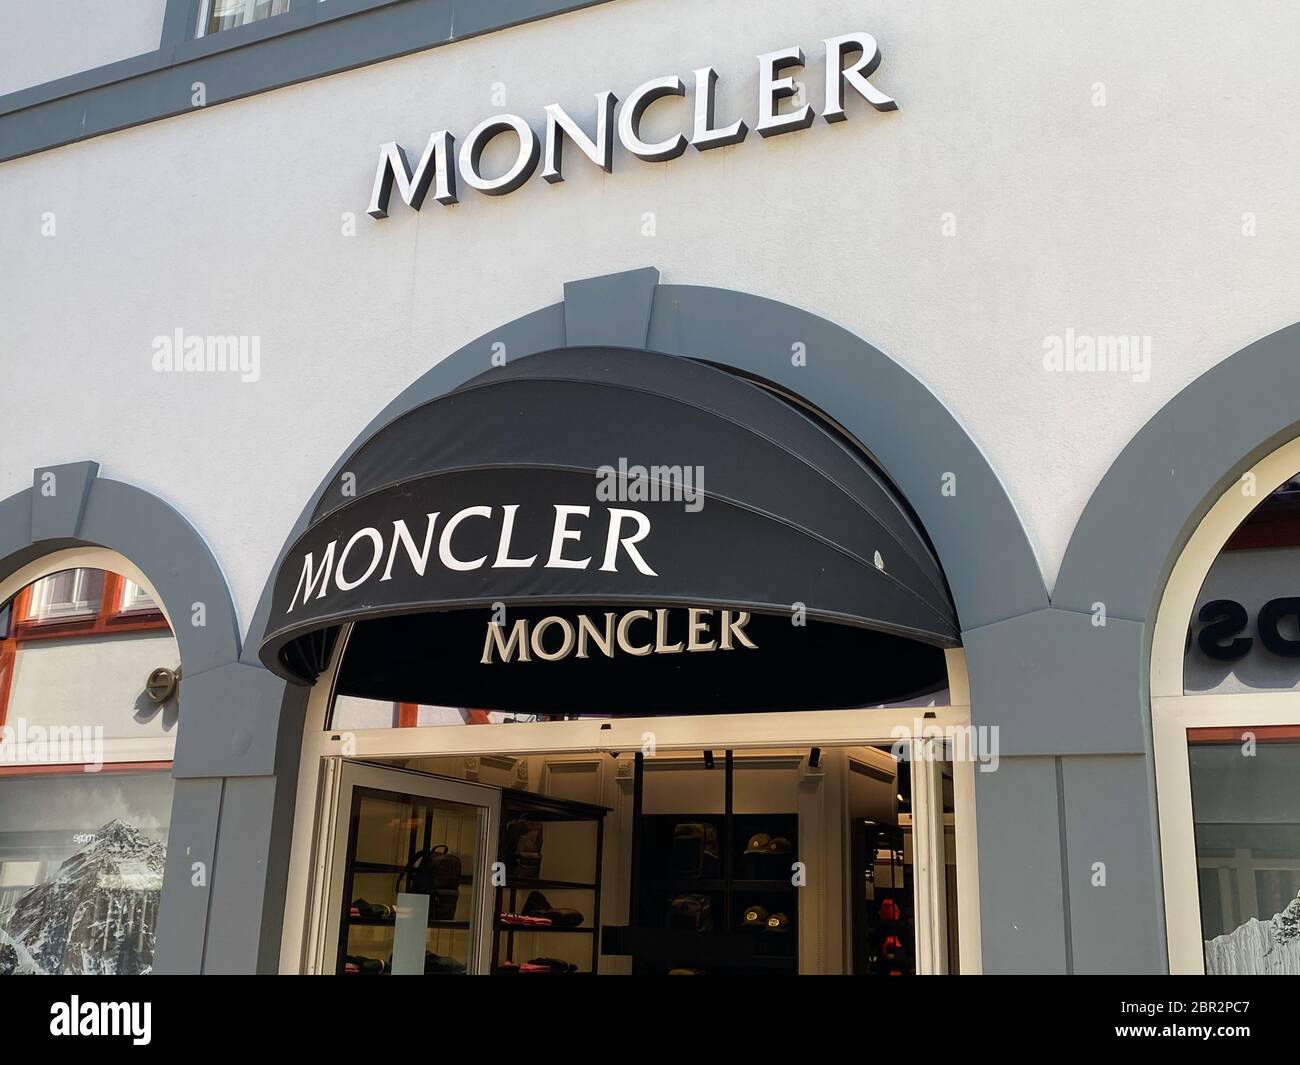 Roermond, Netherlands - May 19. 2020: View on facade with logo lettering of  Moncler fashion company at shop entrance Stock Photo - Alamy